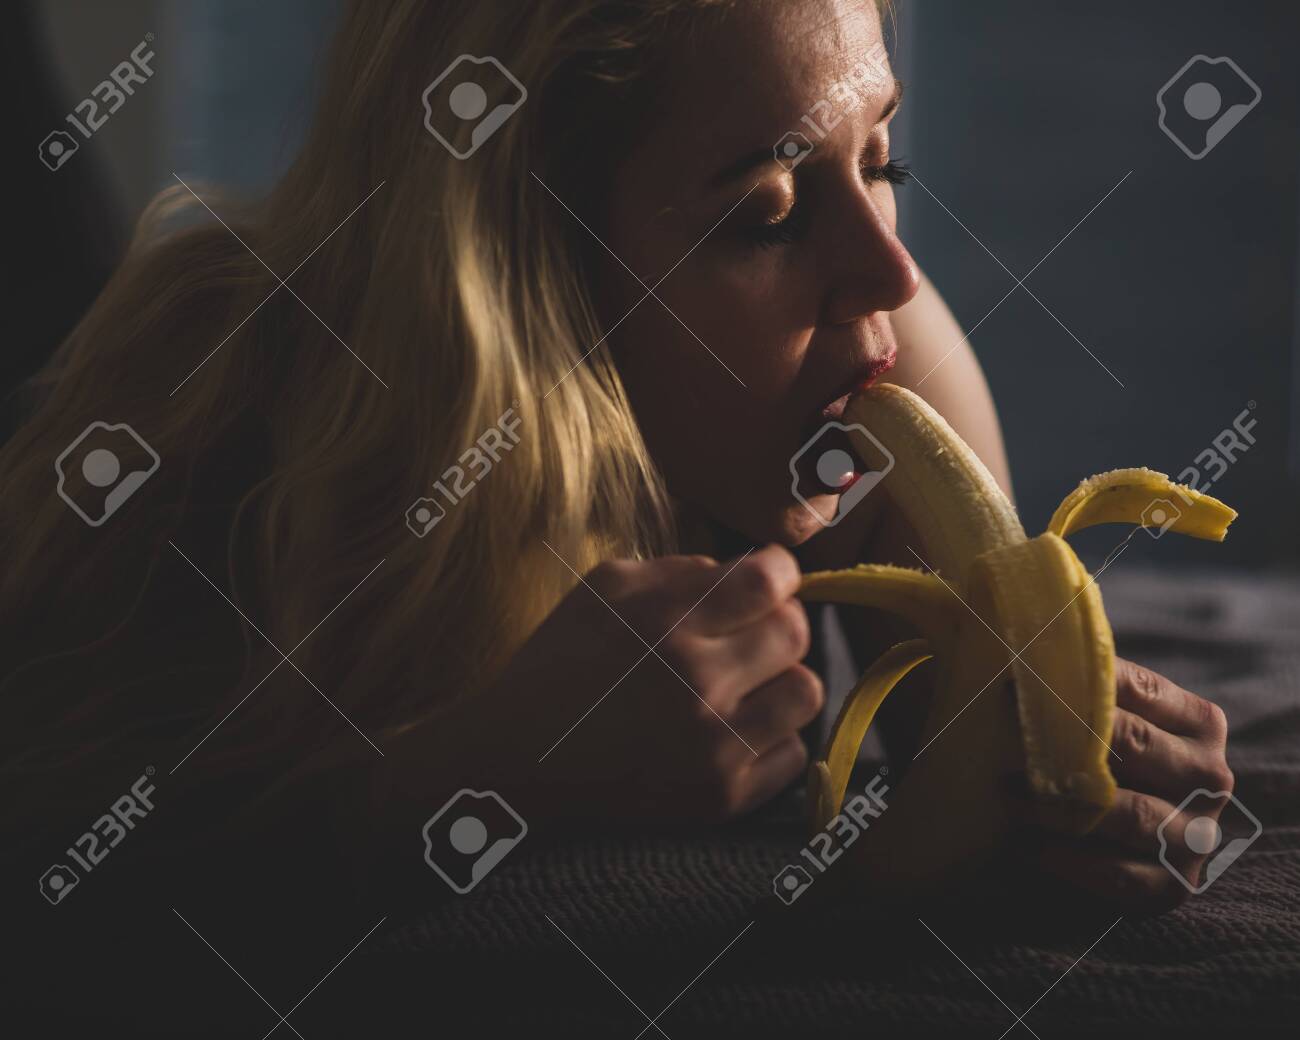 catherine gillett recommends girl sucking on banana pic